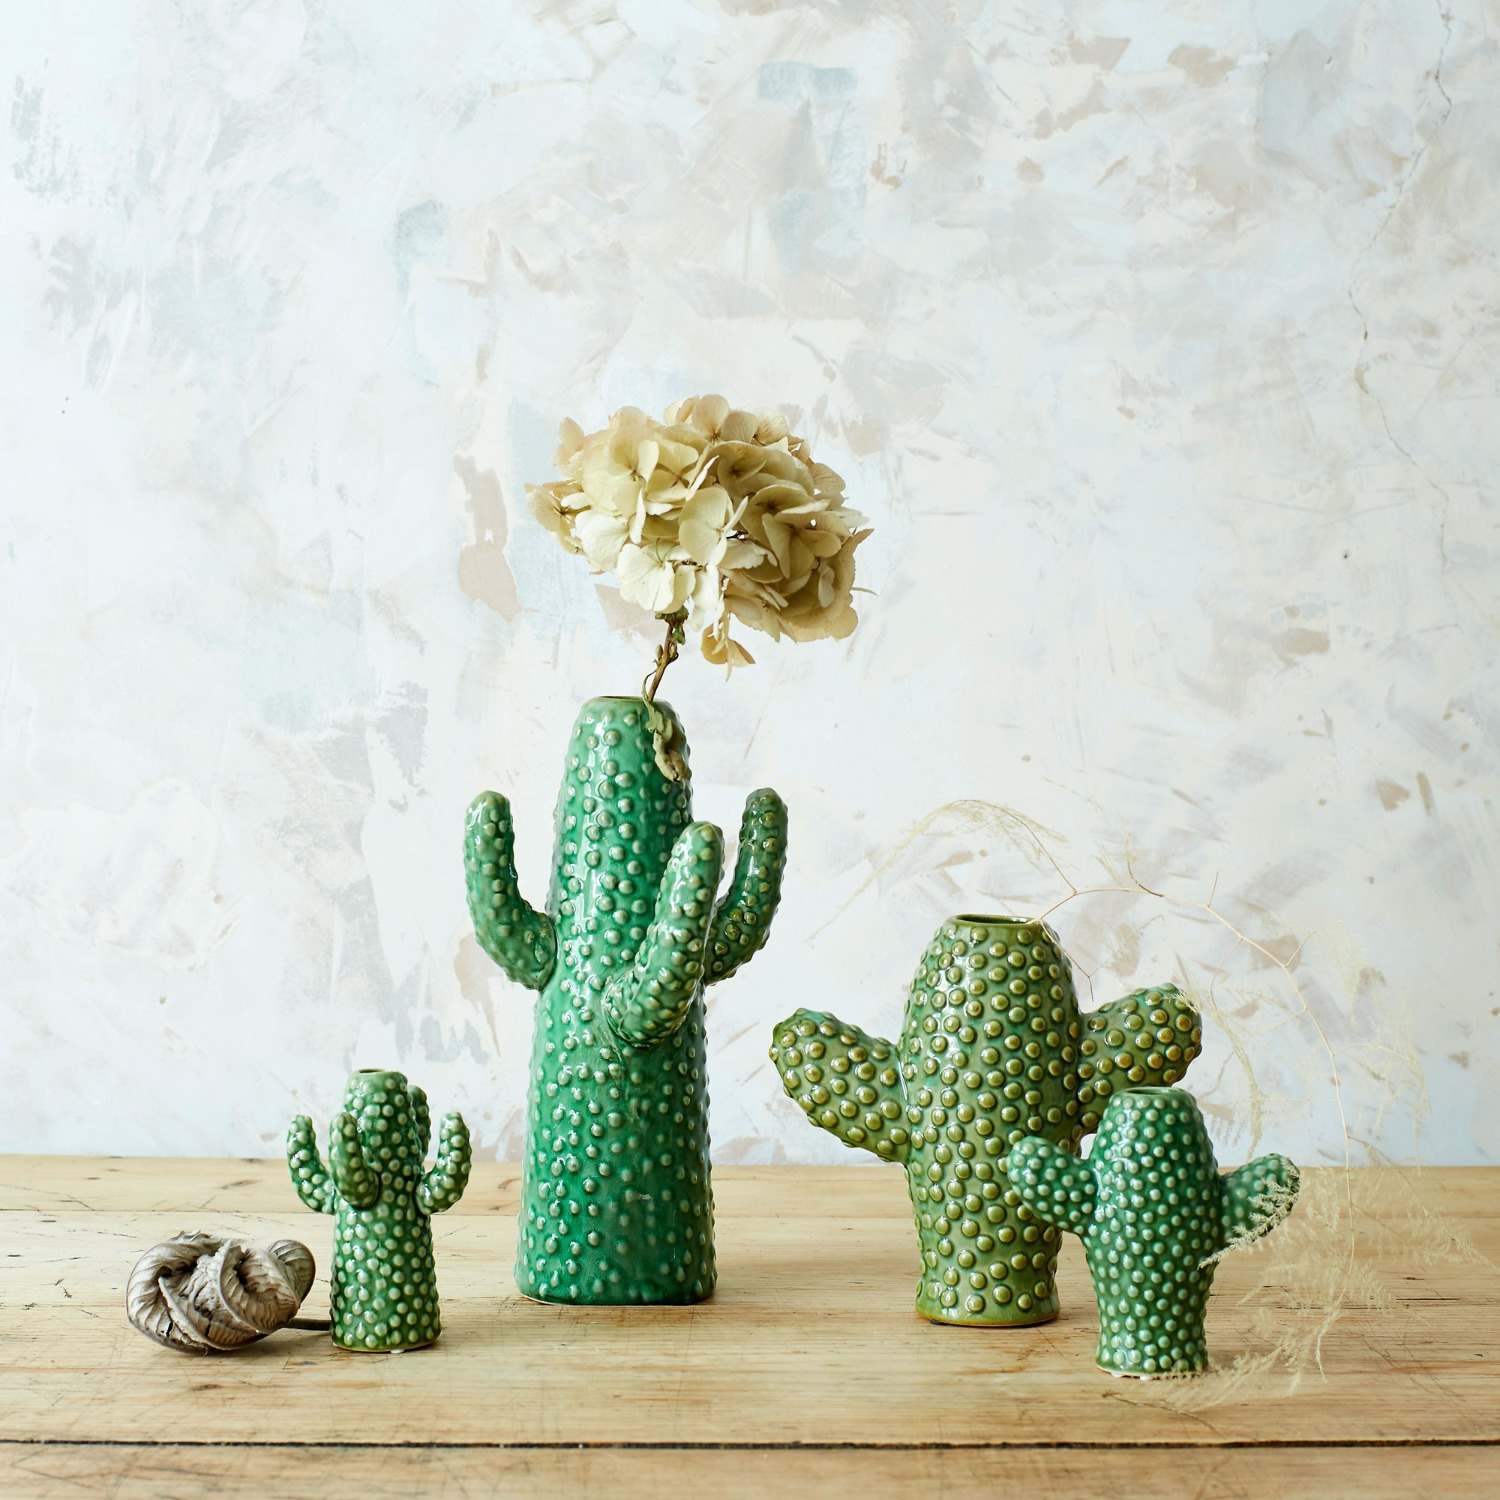 An image of Cactus Vases